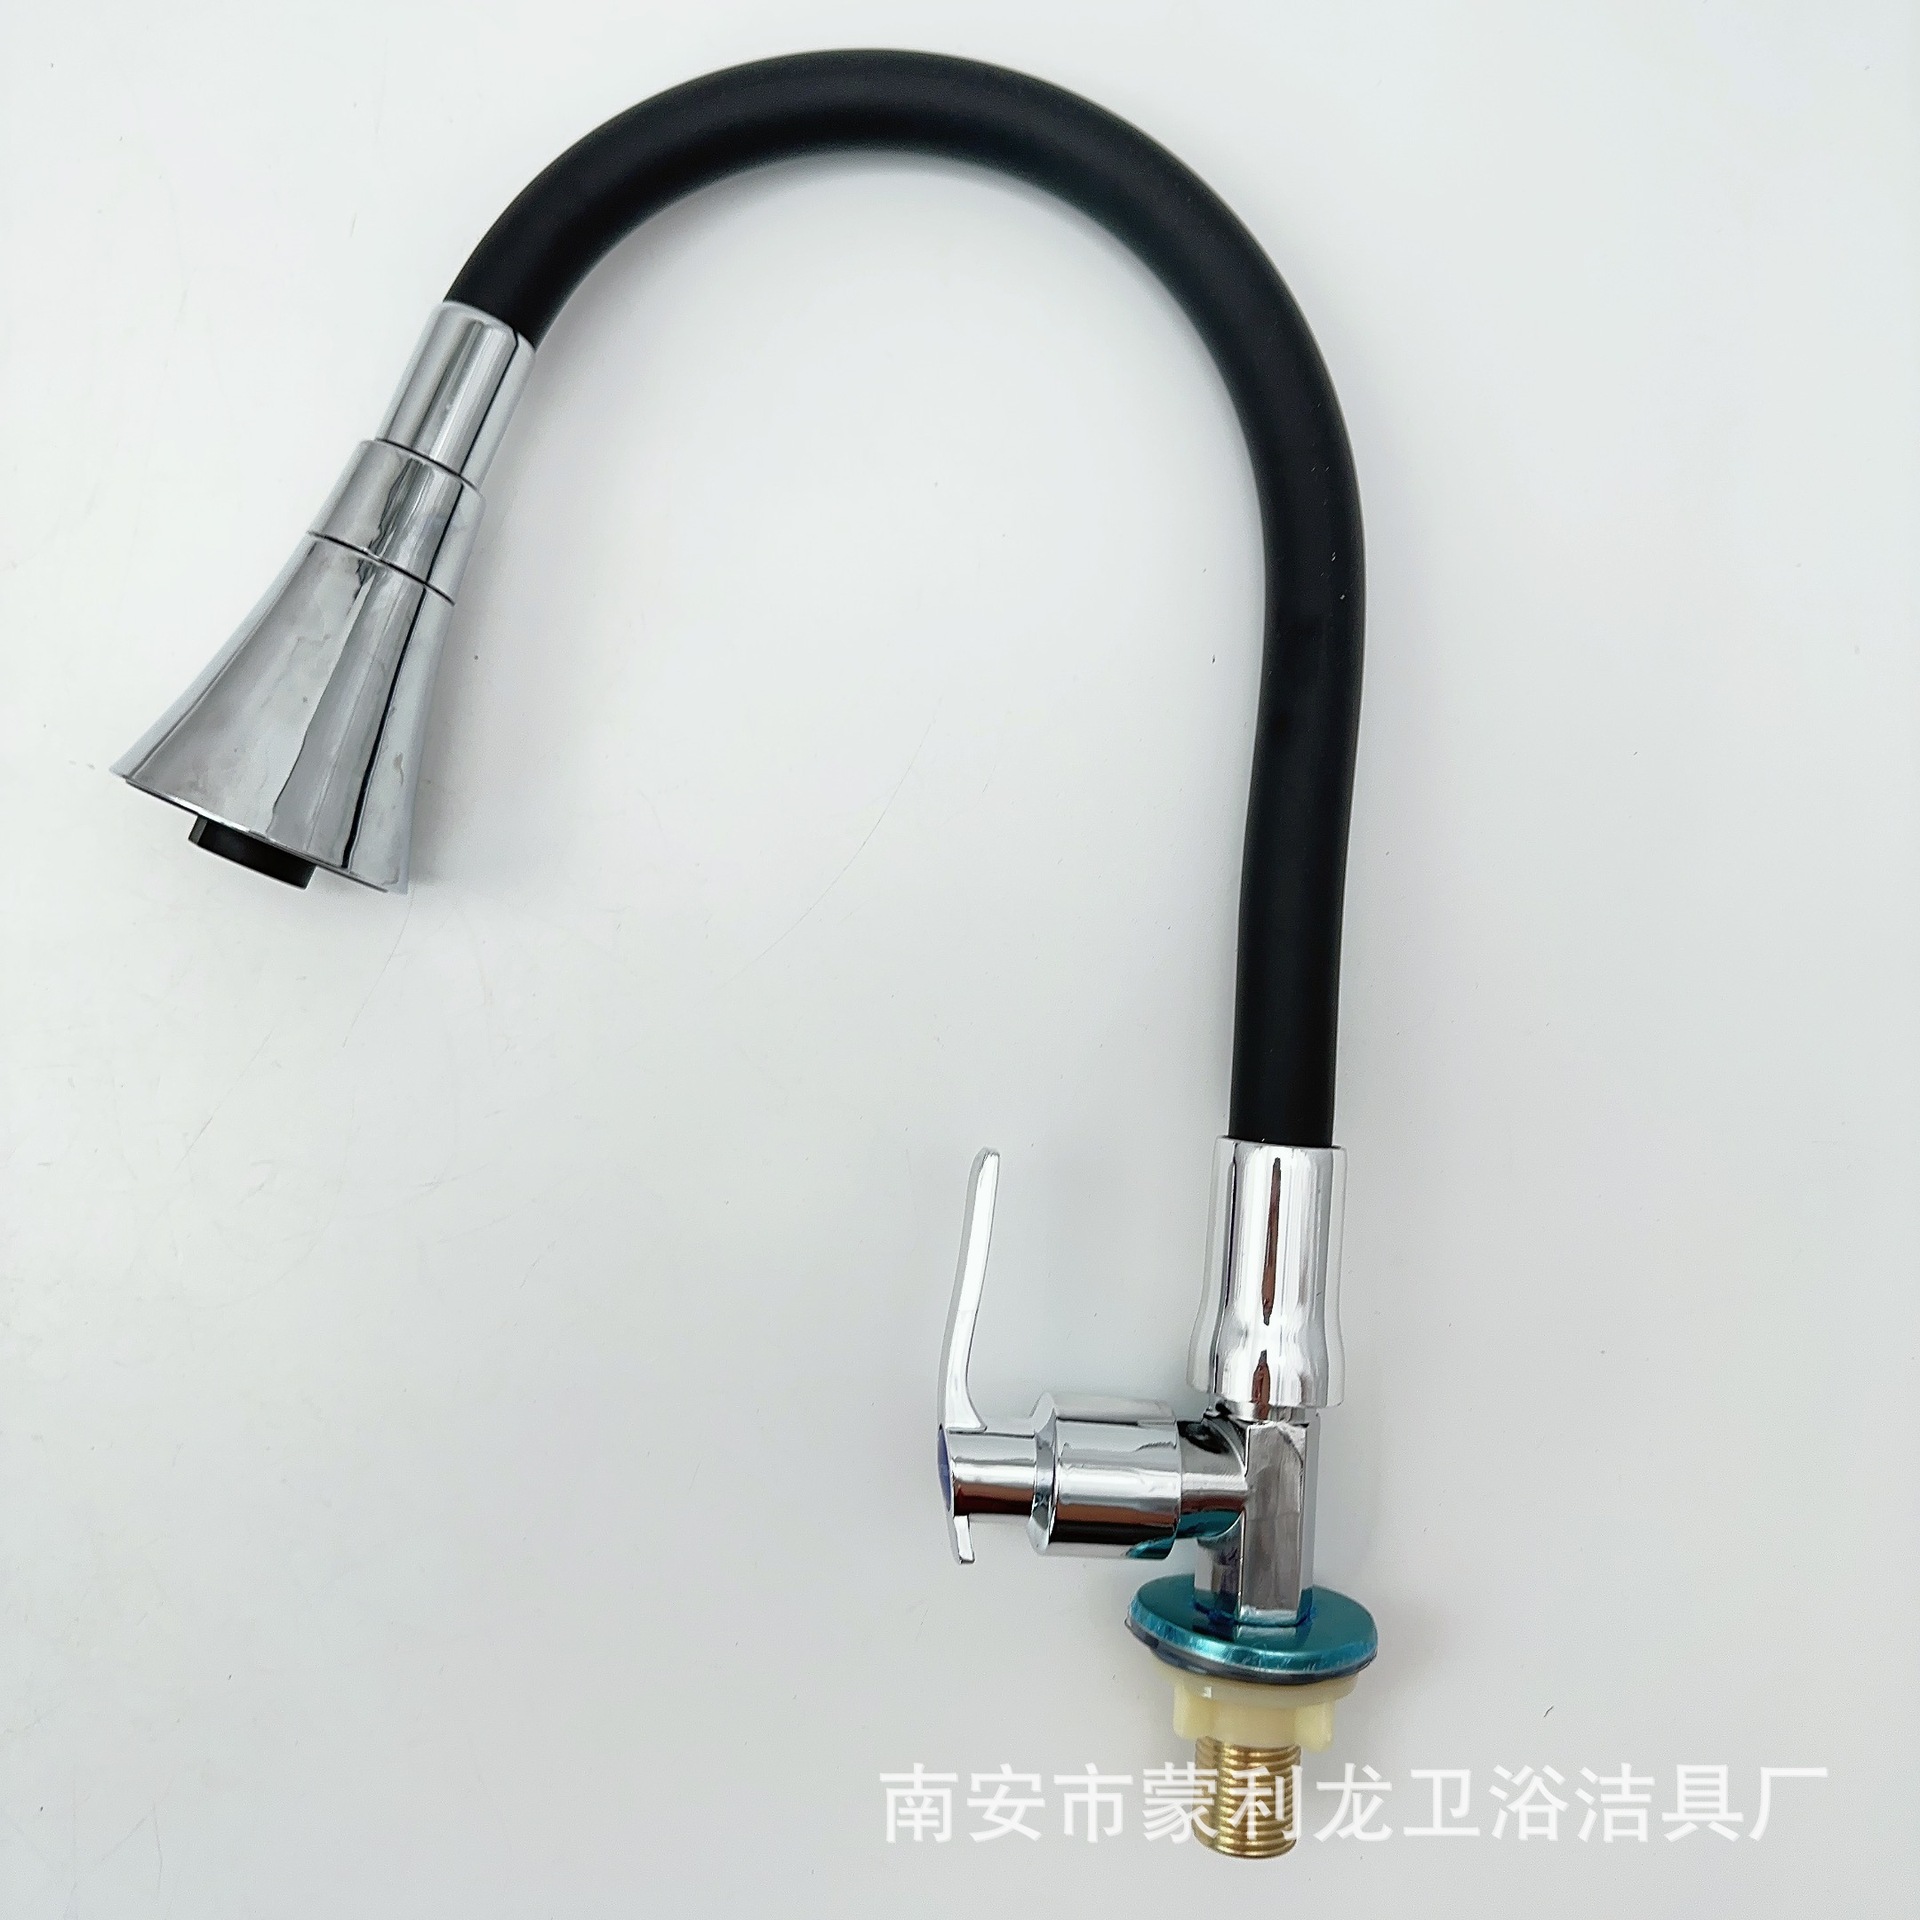 Self-Produced Color Universal Tube Vertical Black Single-Joint Kitchen Faucet Laundry Pool Vegetable Basin Faucet Water Tap